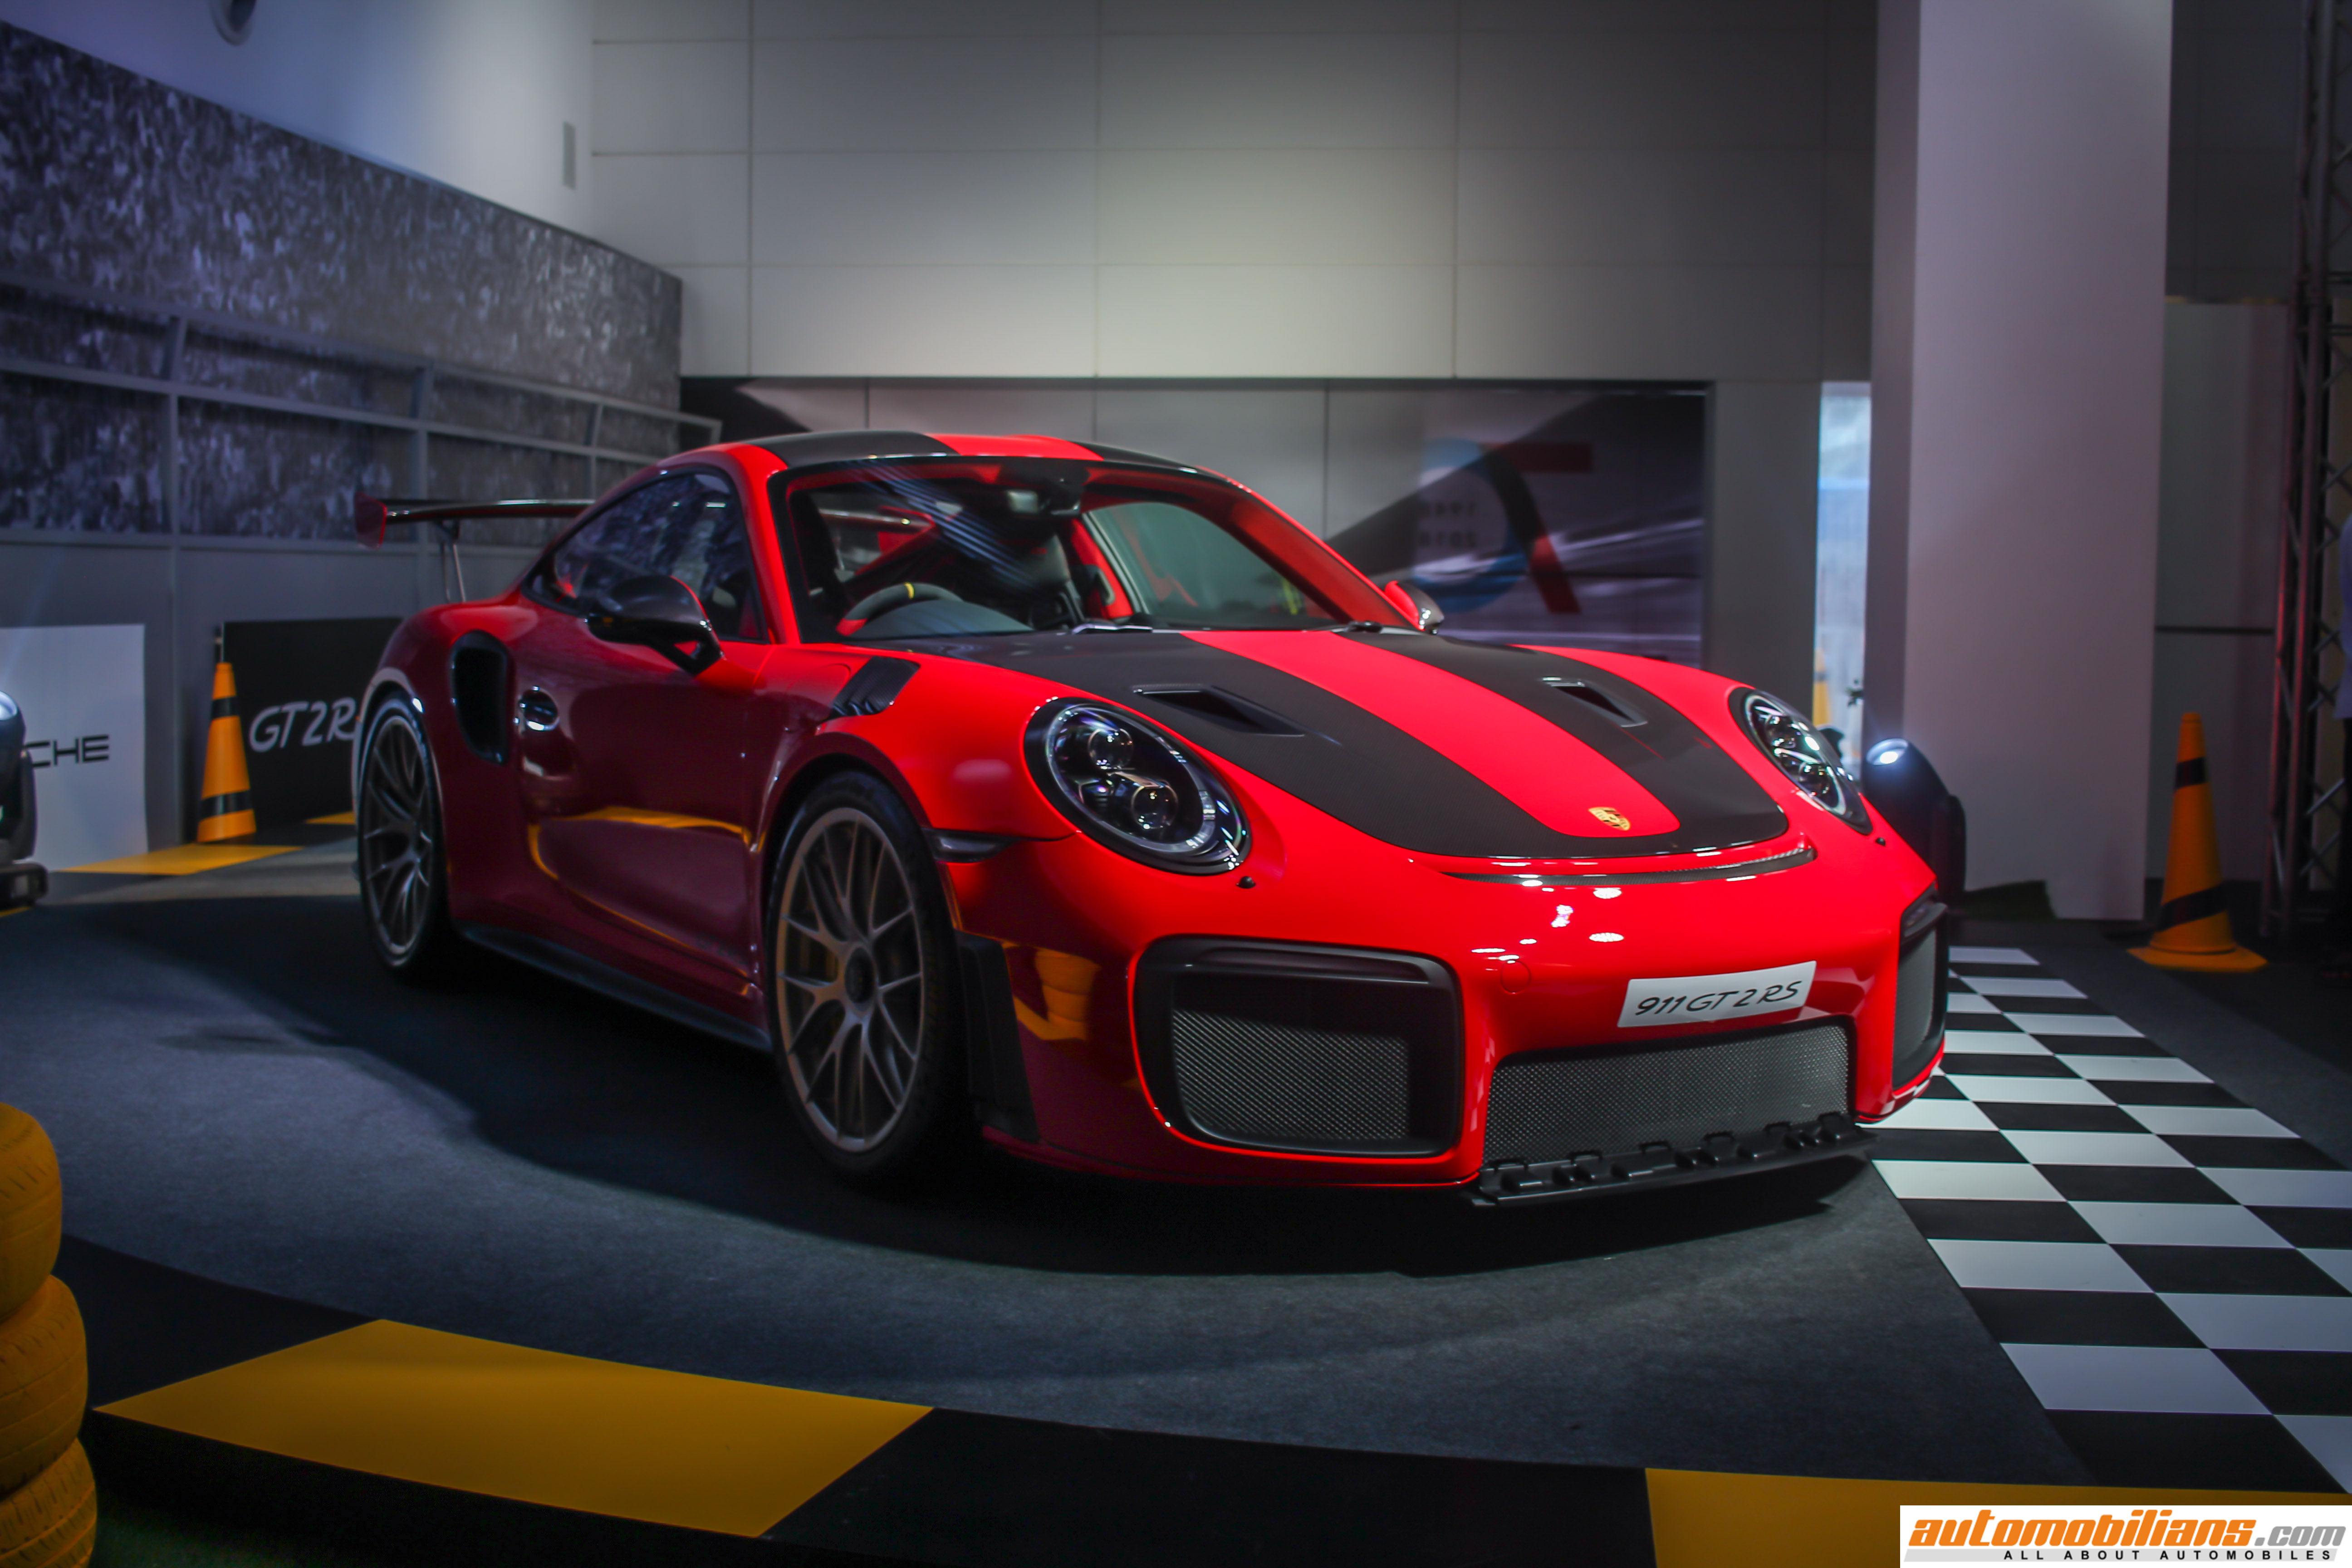 2018 Porsche 911 GT2 RS Launched In India At Rs. 3.88 Crore (Ex-Showroom)